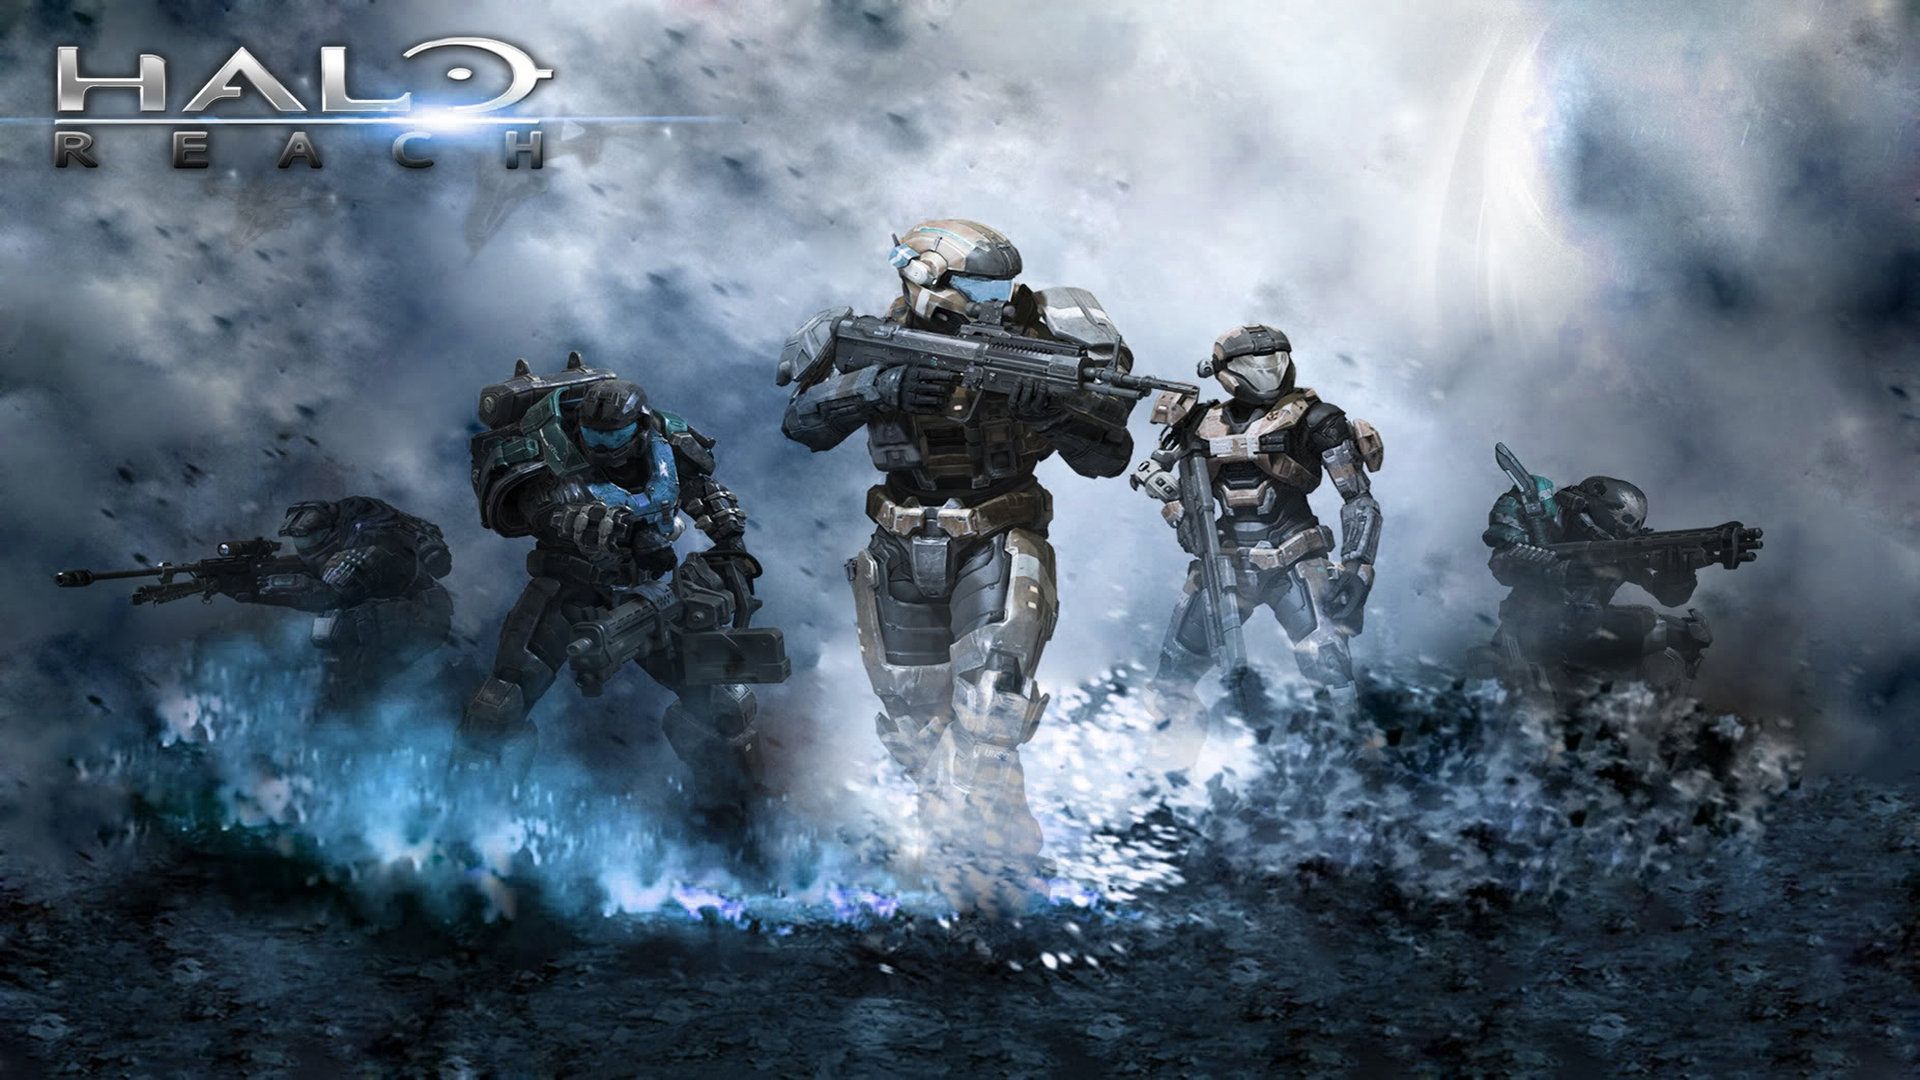 HD Halo Backgrounds